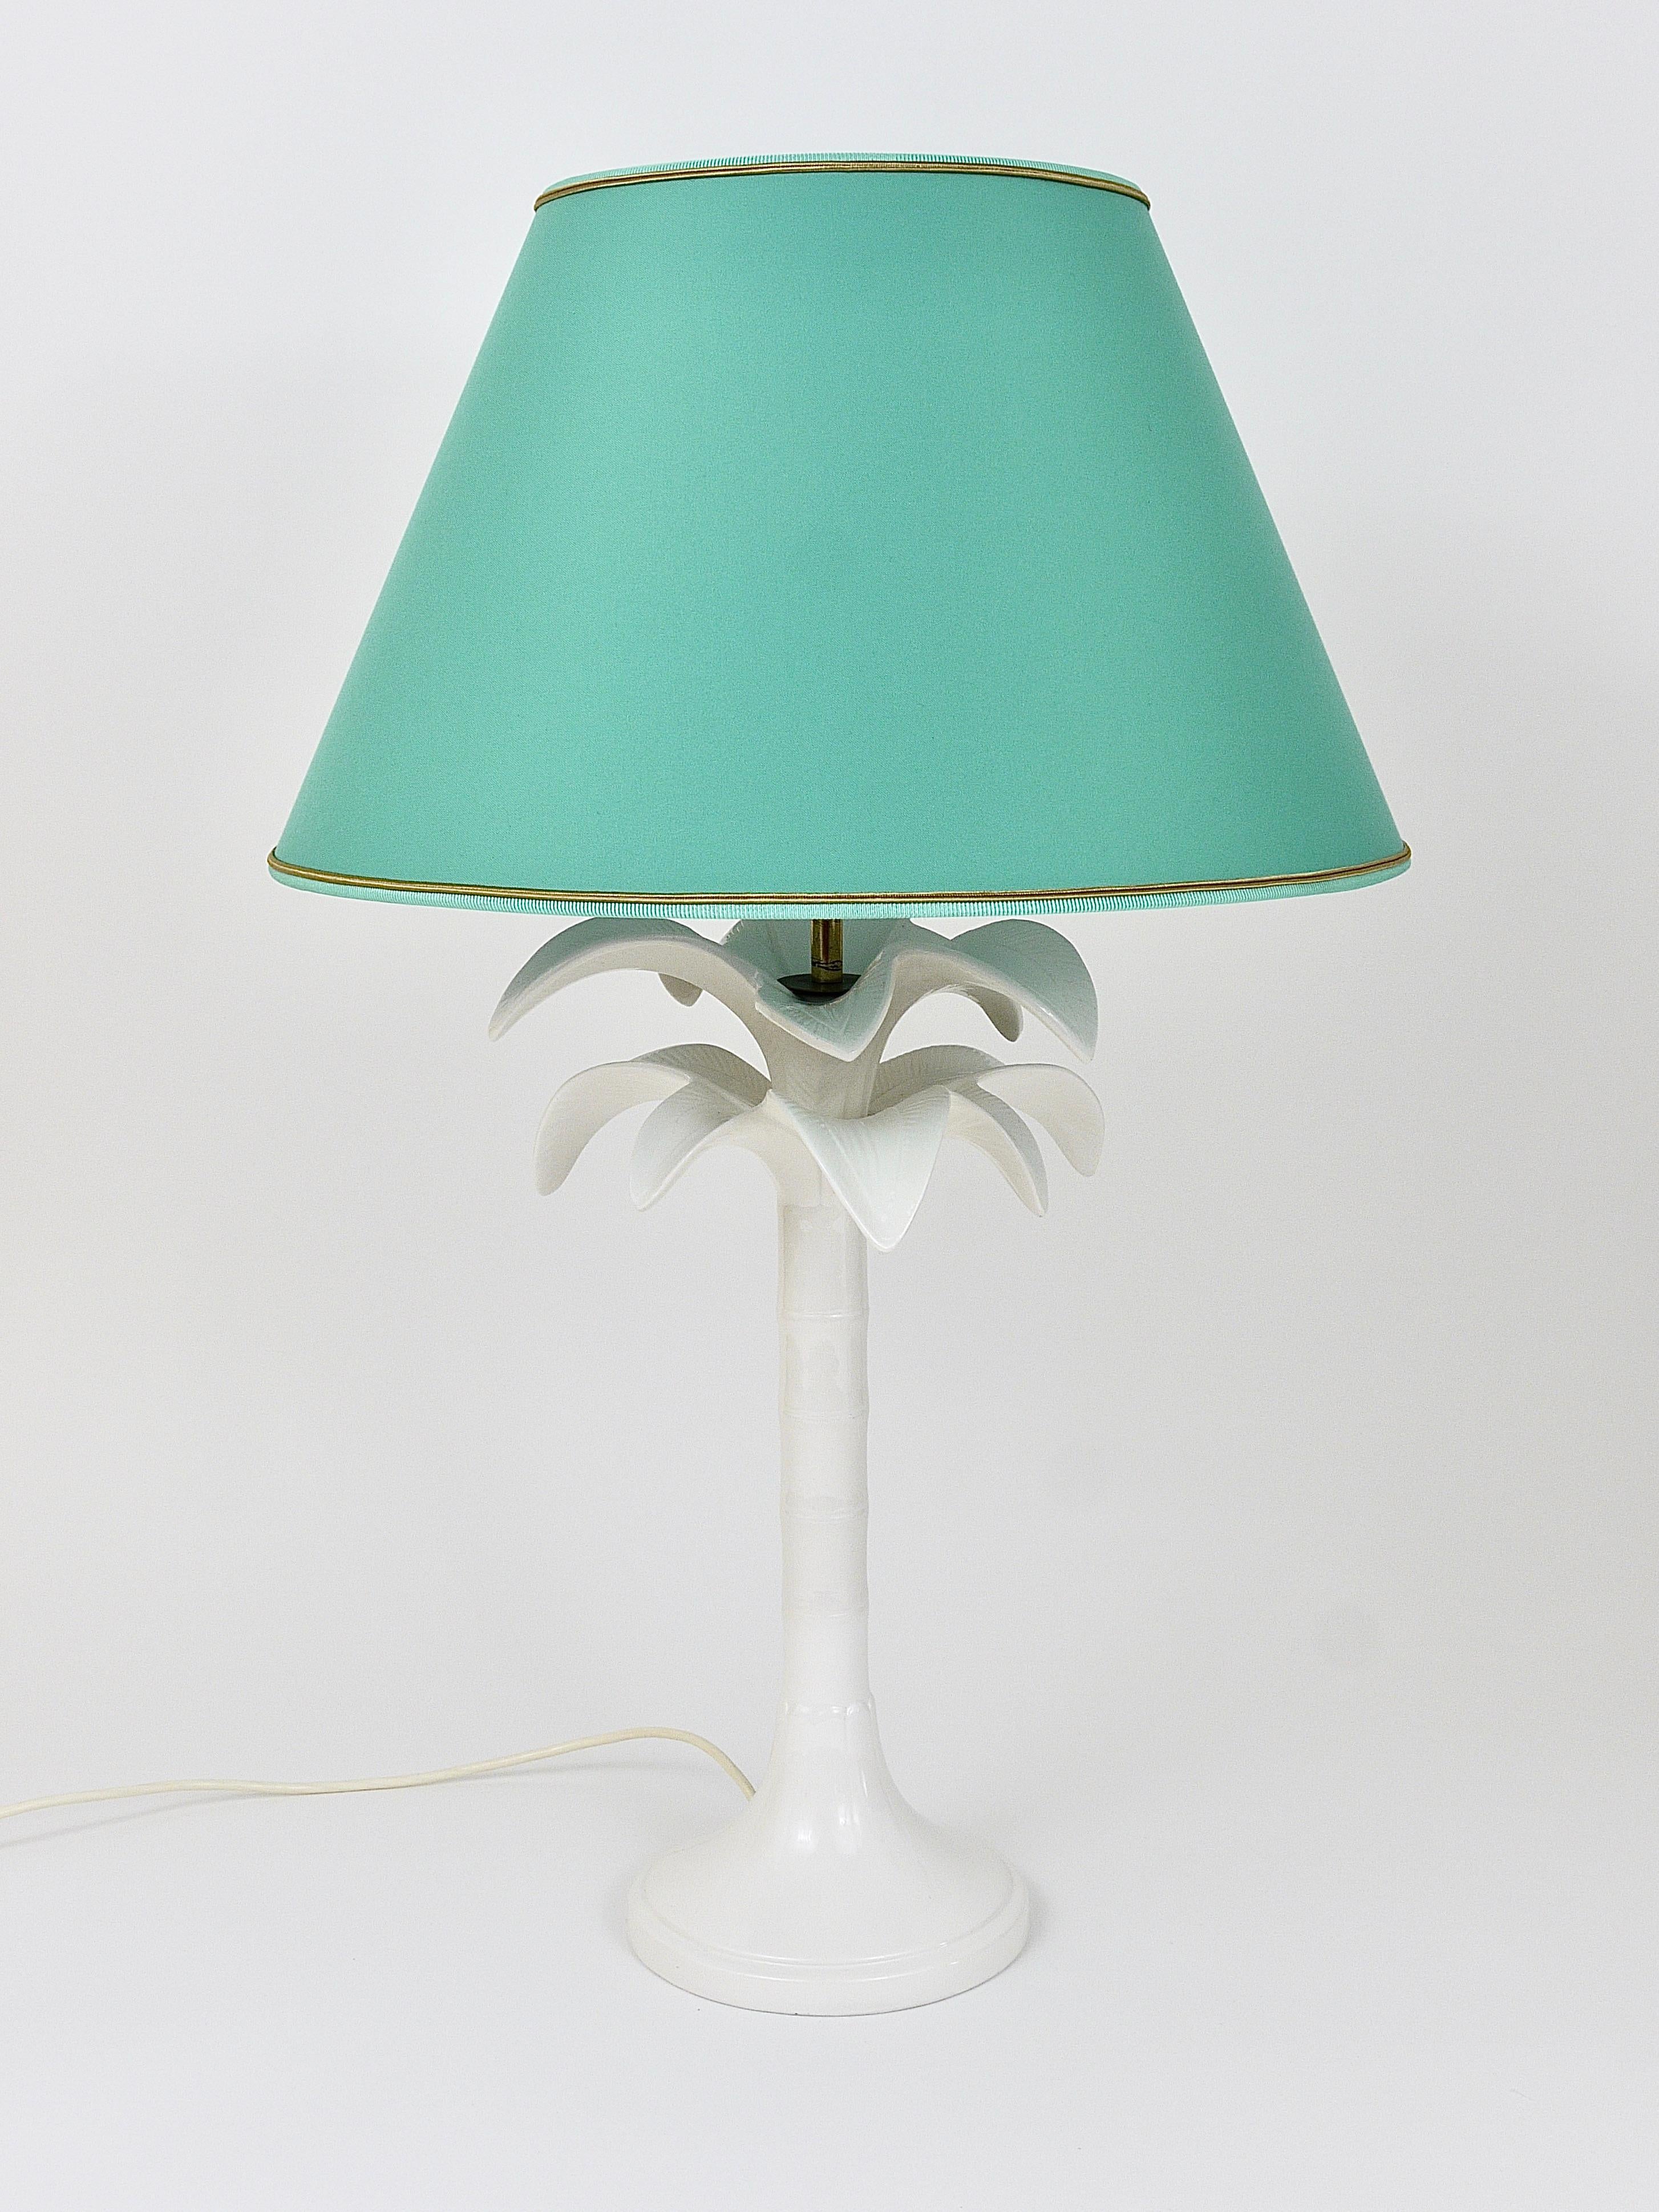 Tommaso Barbi White Palm Tree Faux Bamboo Table Lamp, Italy, 1970s For Sale 5